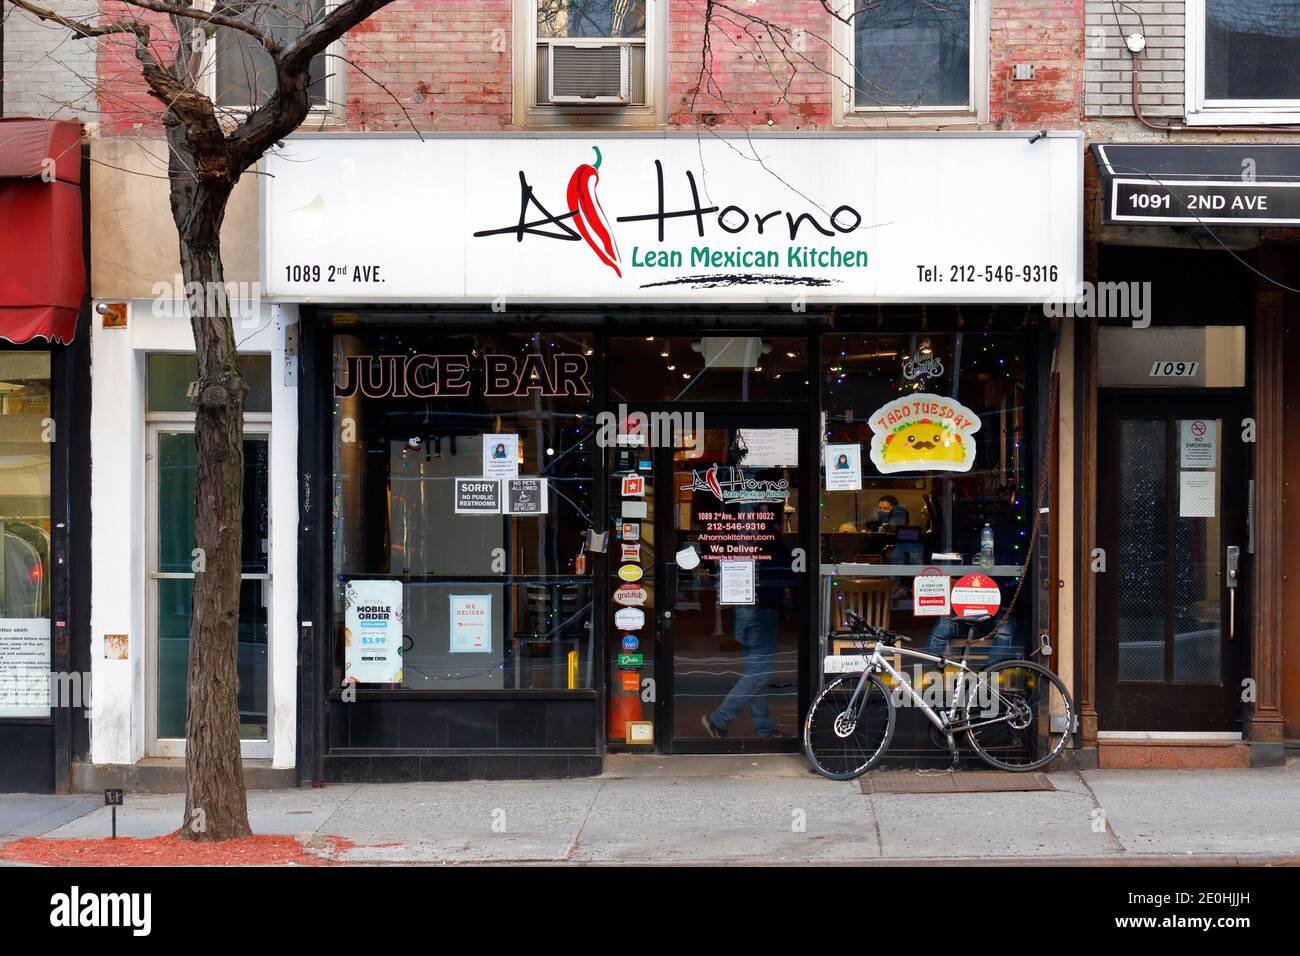 Al Horno Lean Mexican Kitchen, 1089 2nd Ave, New York, NY. exterior storefront of a Mexican restaurant chain restaurant in Manhattan. Stock Photo